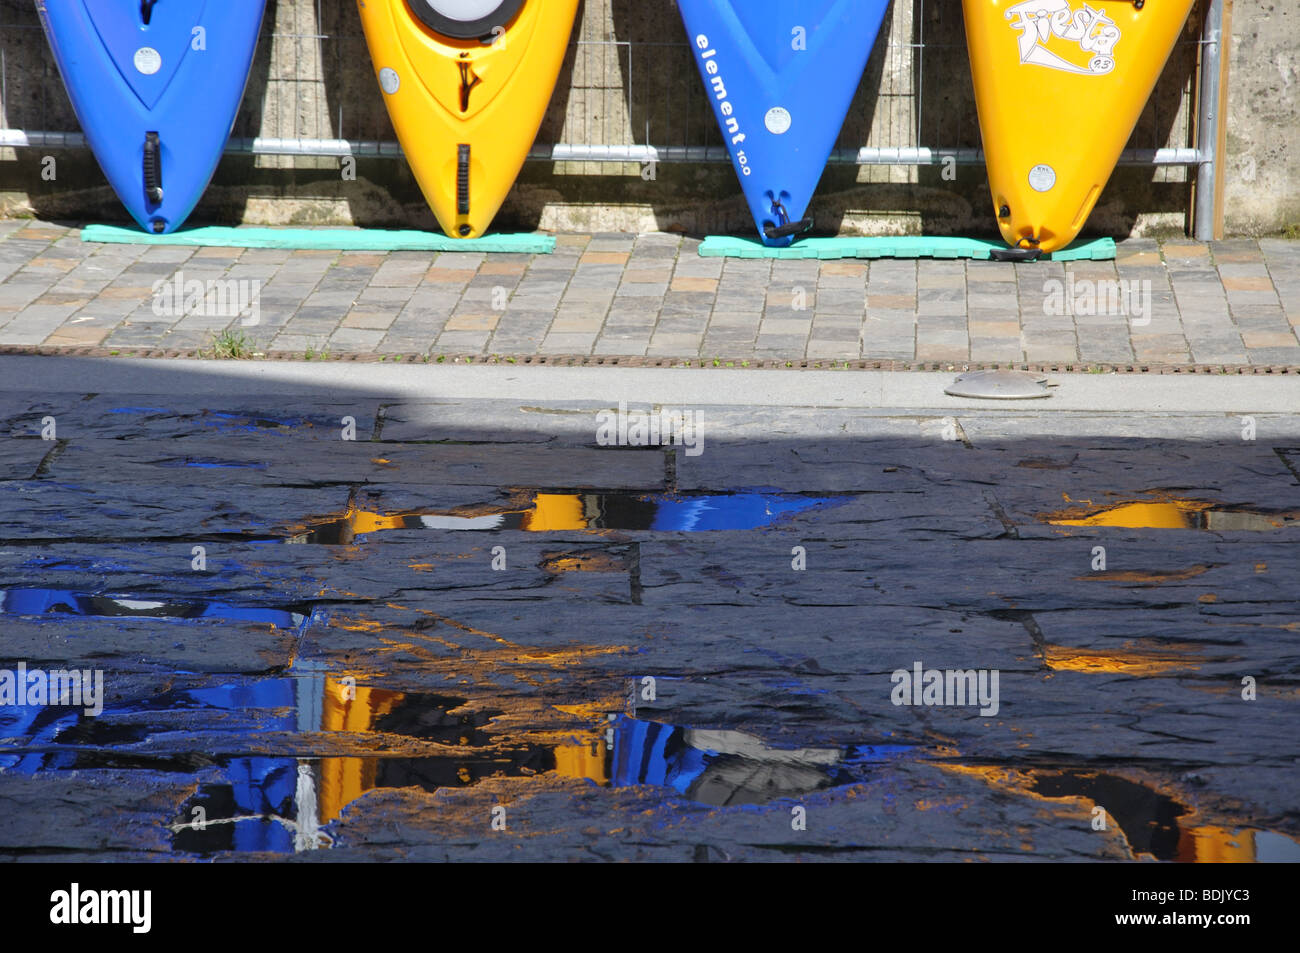 Kayaks and reflections, fforest, Cardigan, Wales Stock Photo